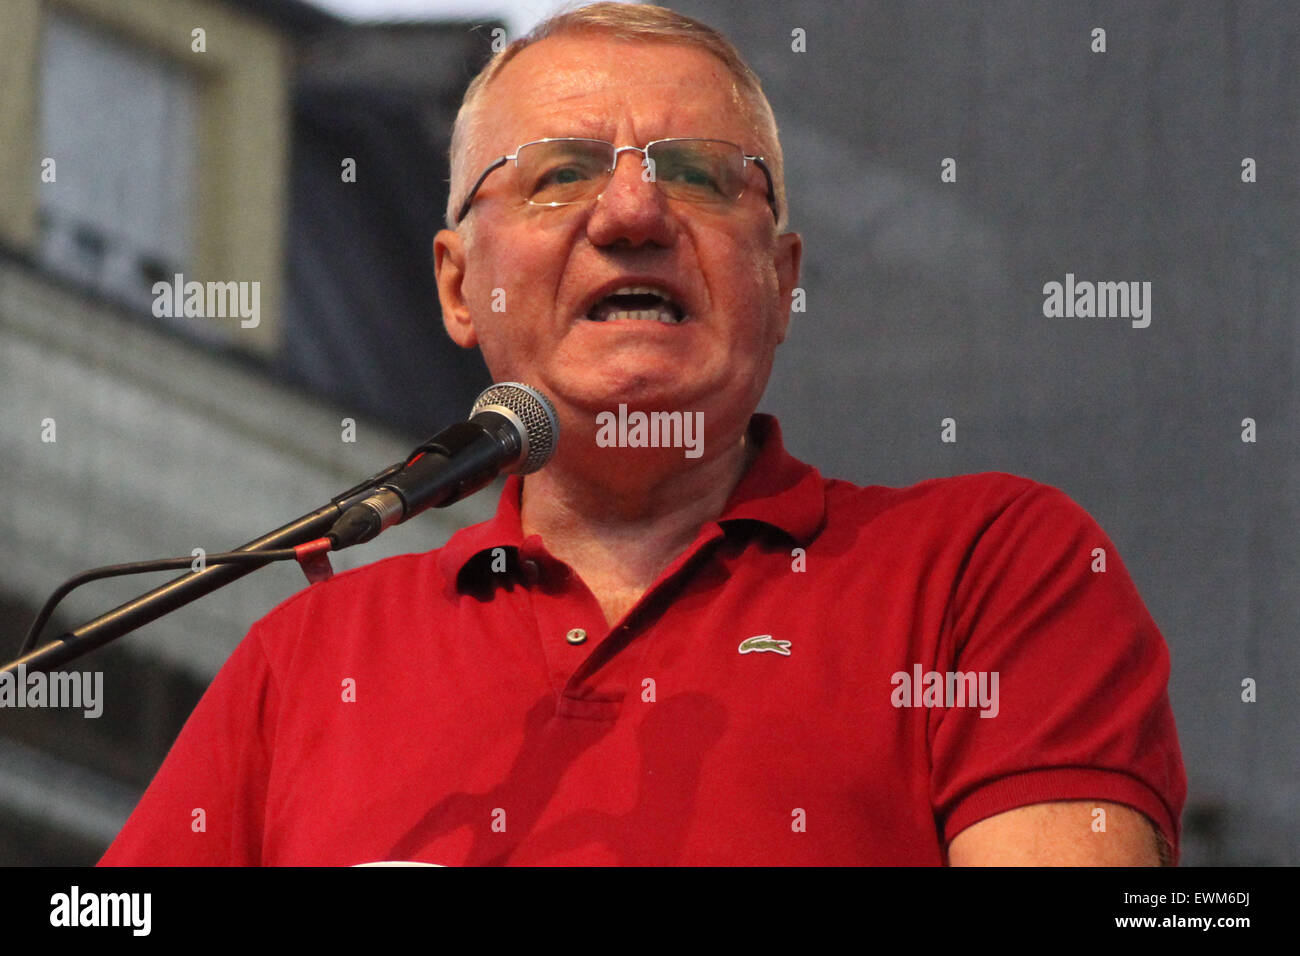 Belgrade, Serbia. 28th June, 2015. Vojislav Seselj, leader of Serbian Radical Party, addresses supporters at the Republic Square in Belgrade, Serbia, on June 28, 2015. Vojislav Seselj, 60-year-old, who was previous released due to serious health issues from the prison in Sheveningen, Holland, where he was sentenced to serve for war crime by the International Criminal Court in Hague, expressed his intention to continue his political career during the rally on Sunday. © Nemanja Cabric/Xinhua/Alamy Live News Stock Photo